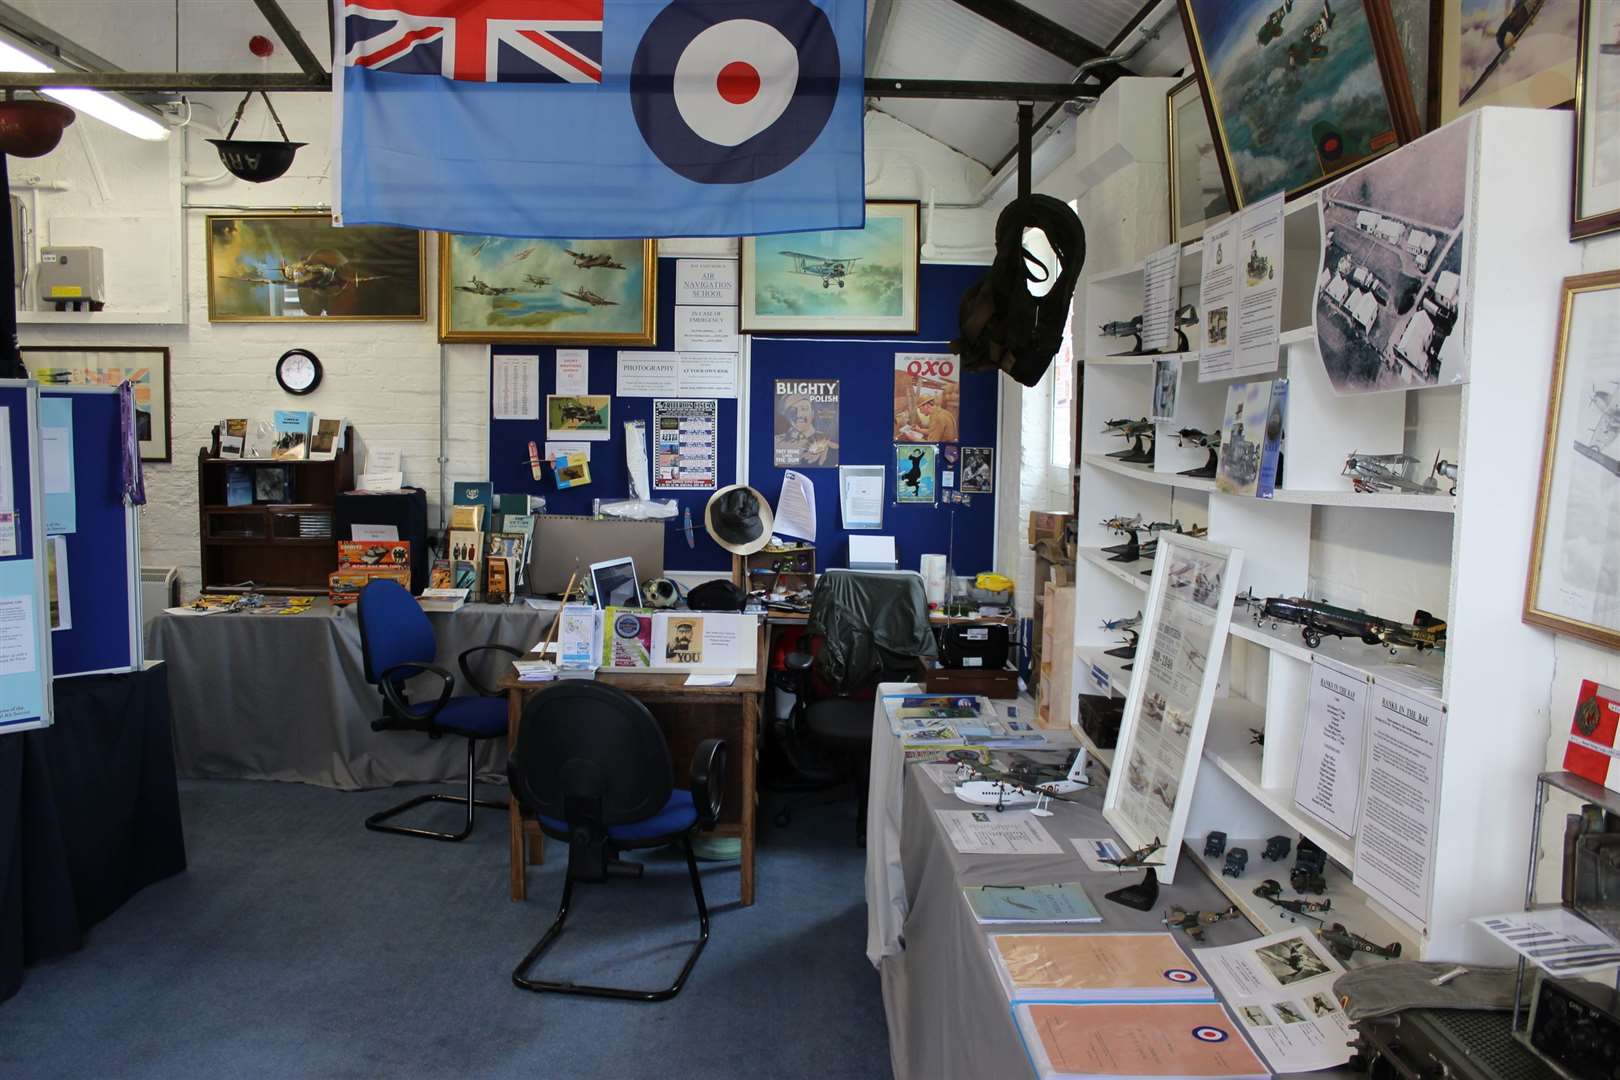 Inside Eastchurch Aviation Museum celebrating the birthplace of British aviation